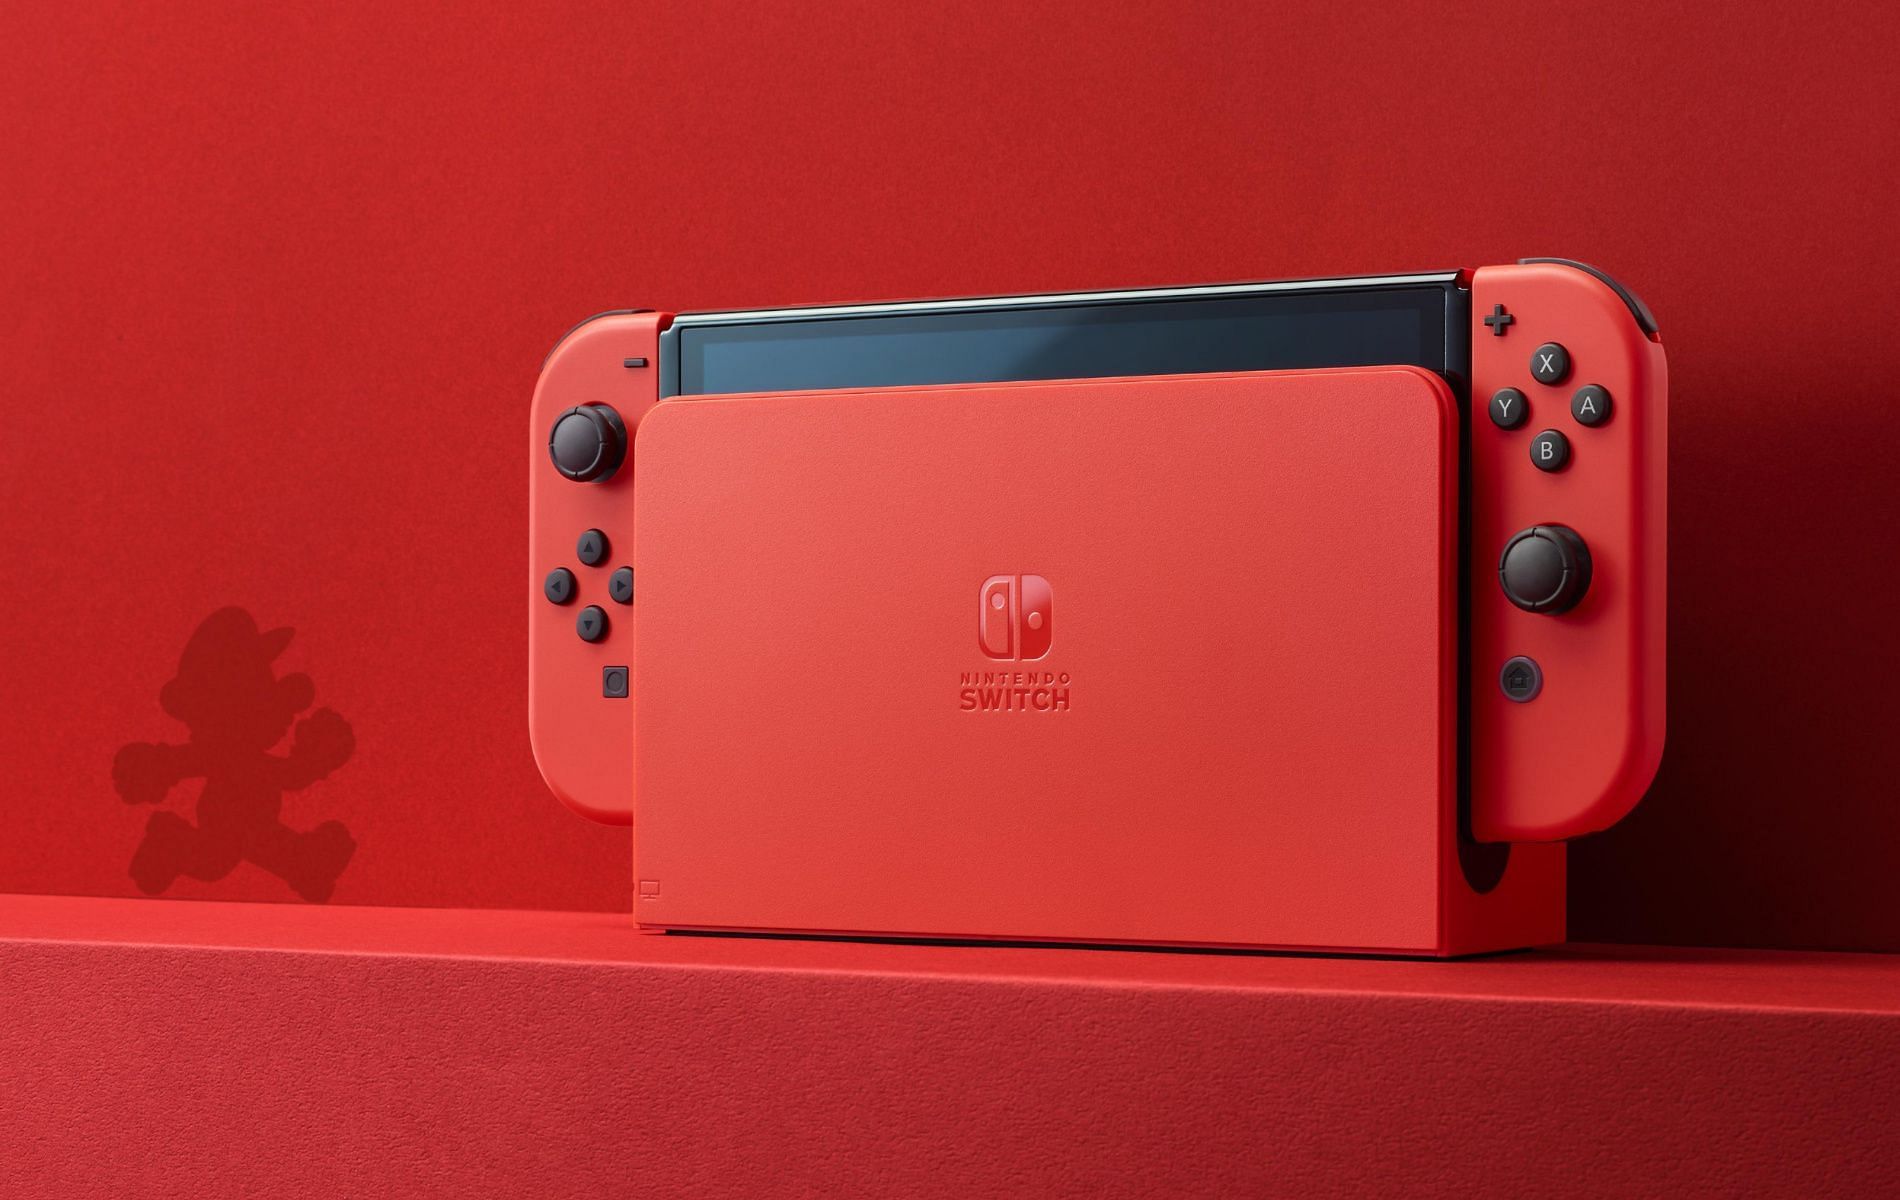 Official promotioanl screenshot for the brand new Nintendo Switch OLED Model Mario Red Edition by Nintendo